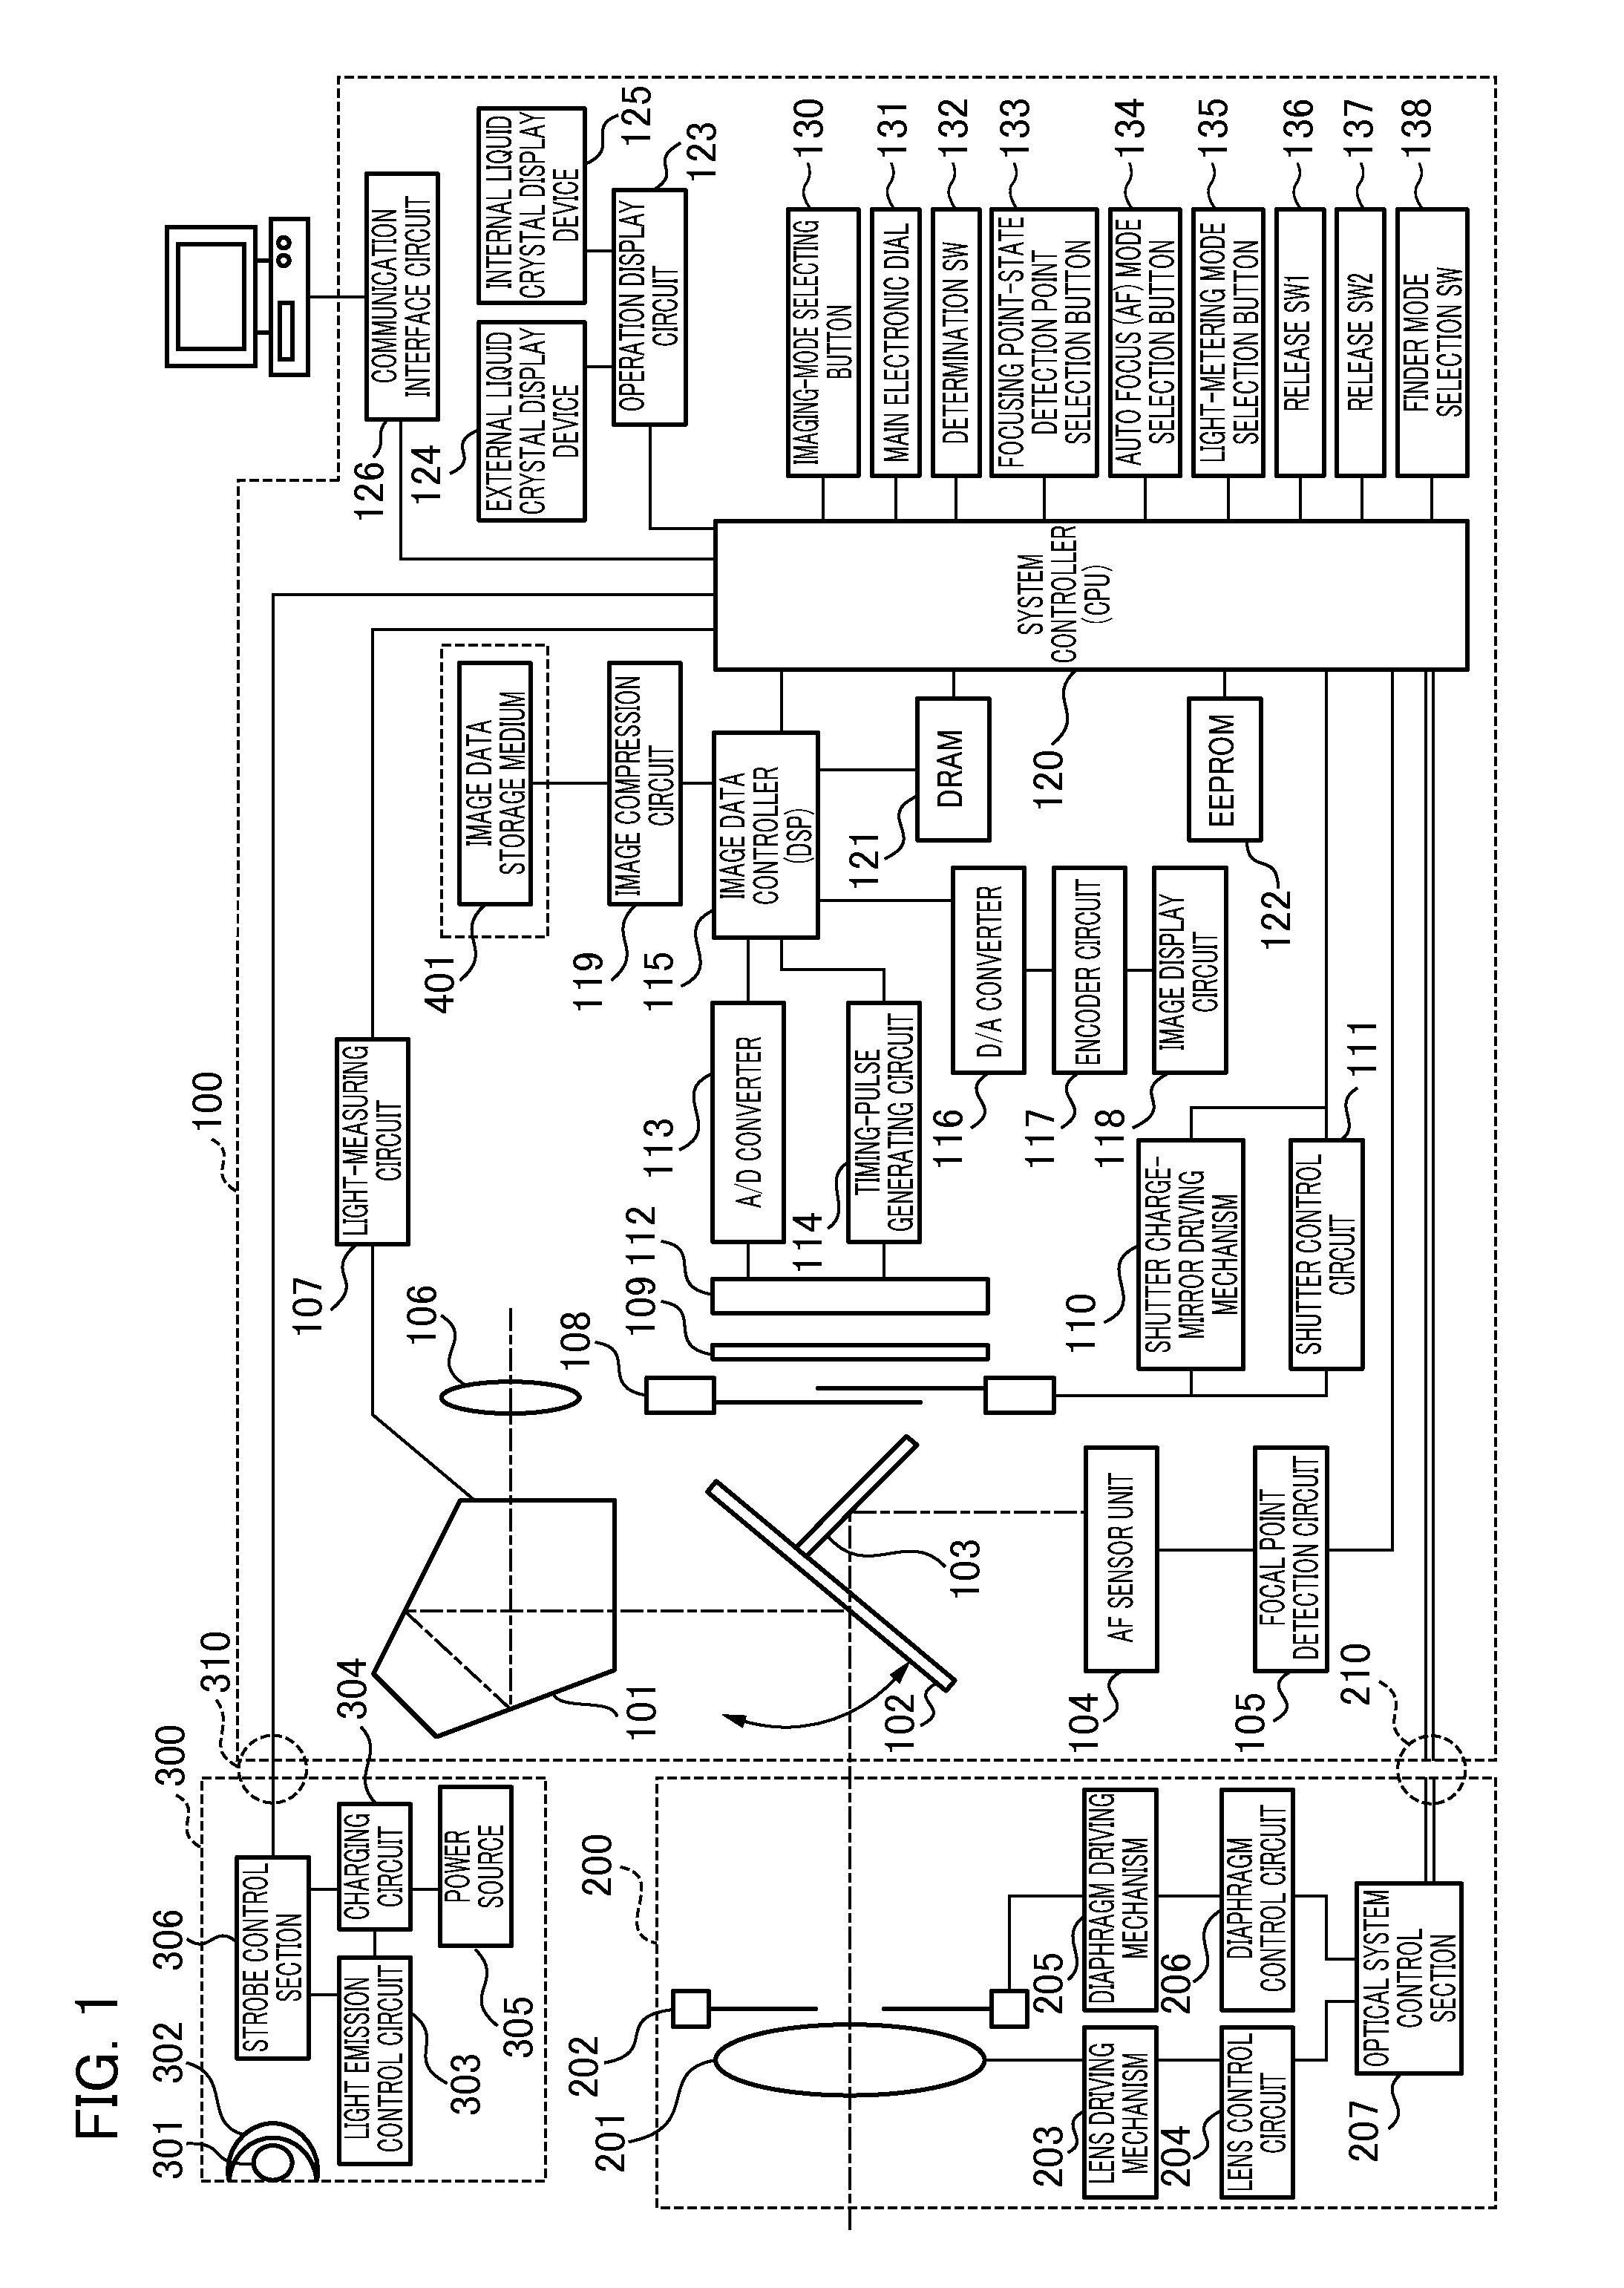 Imaging apparatus and method for controlling same